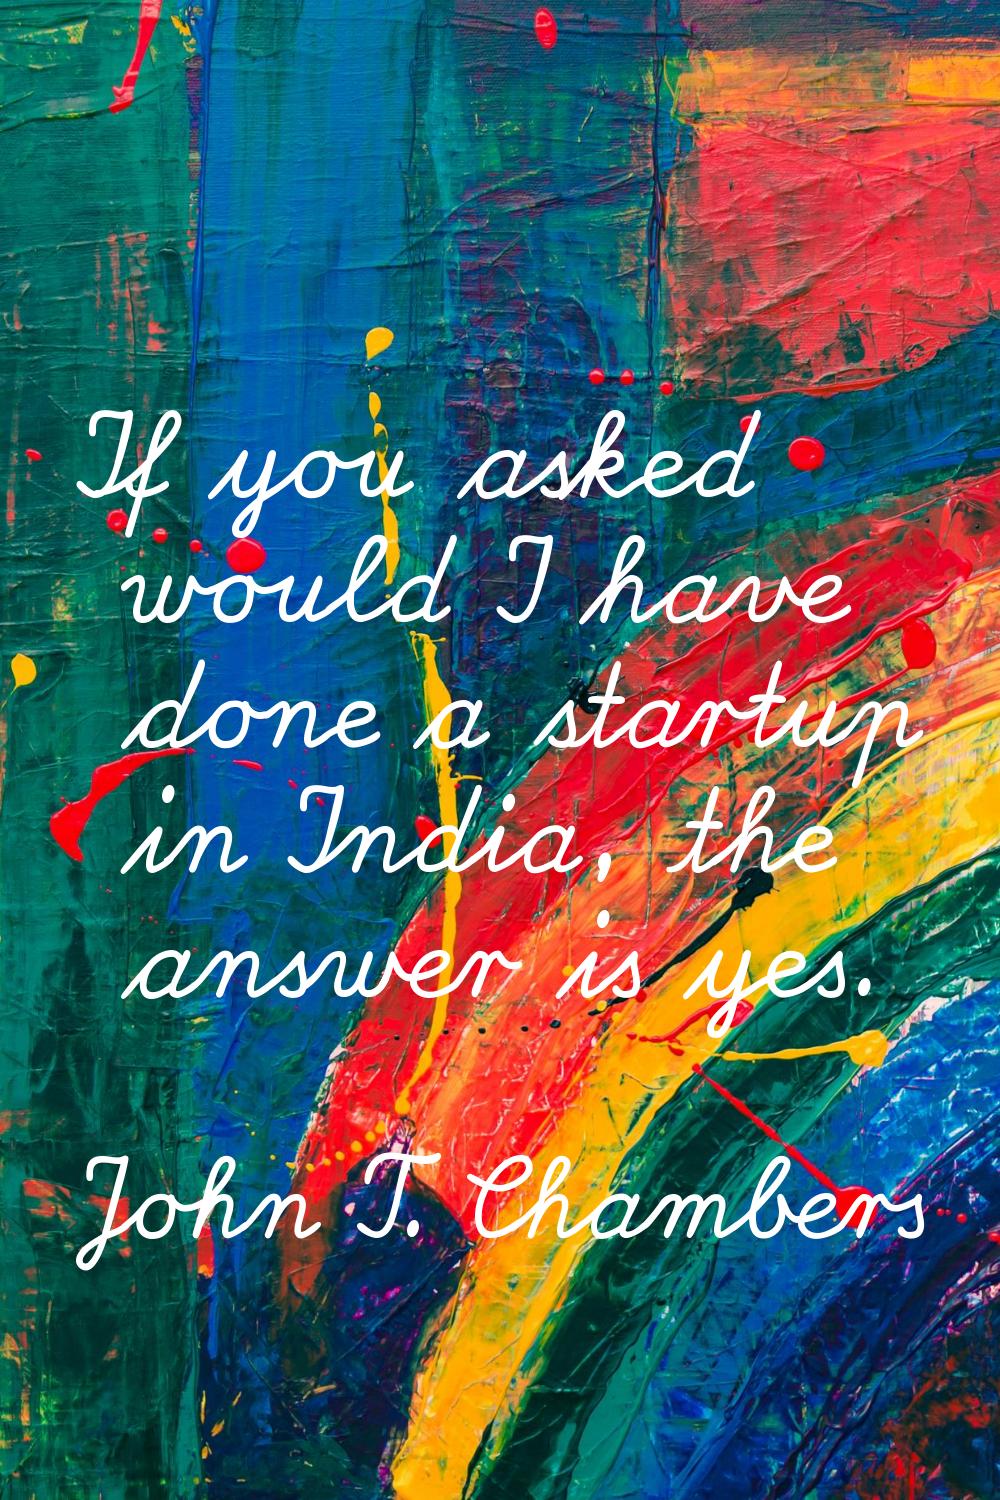 If you asked would I have done a startup in India, the answer is yes.